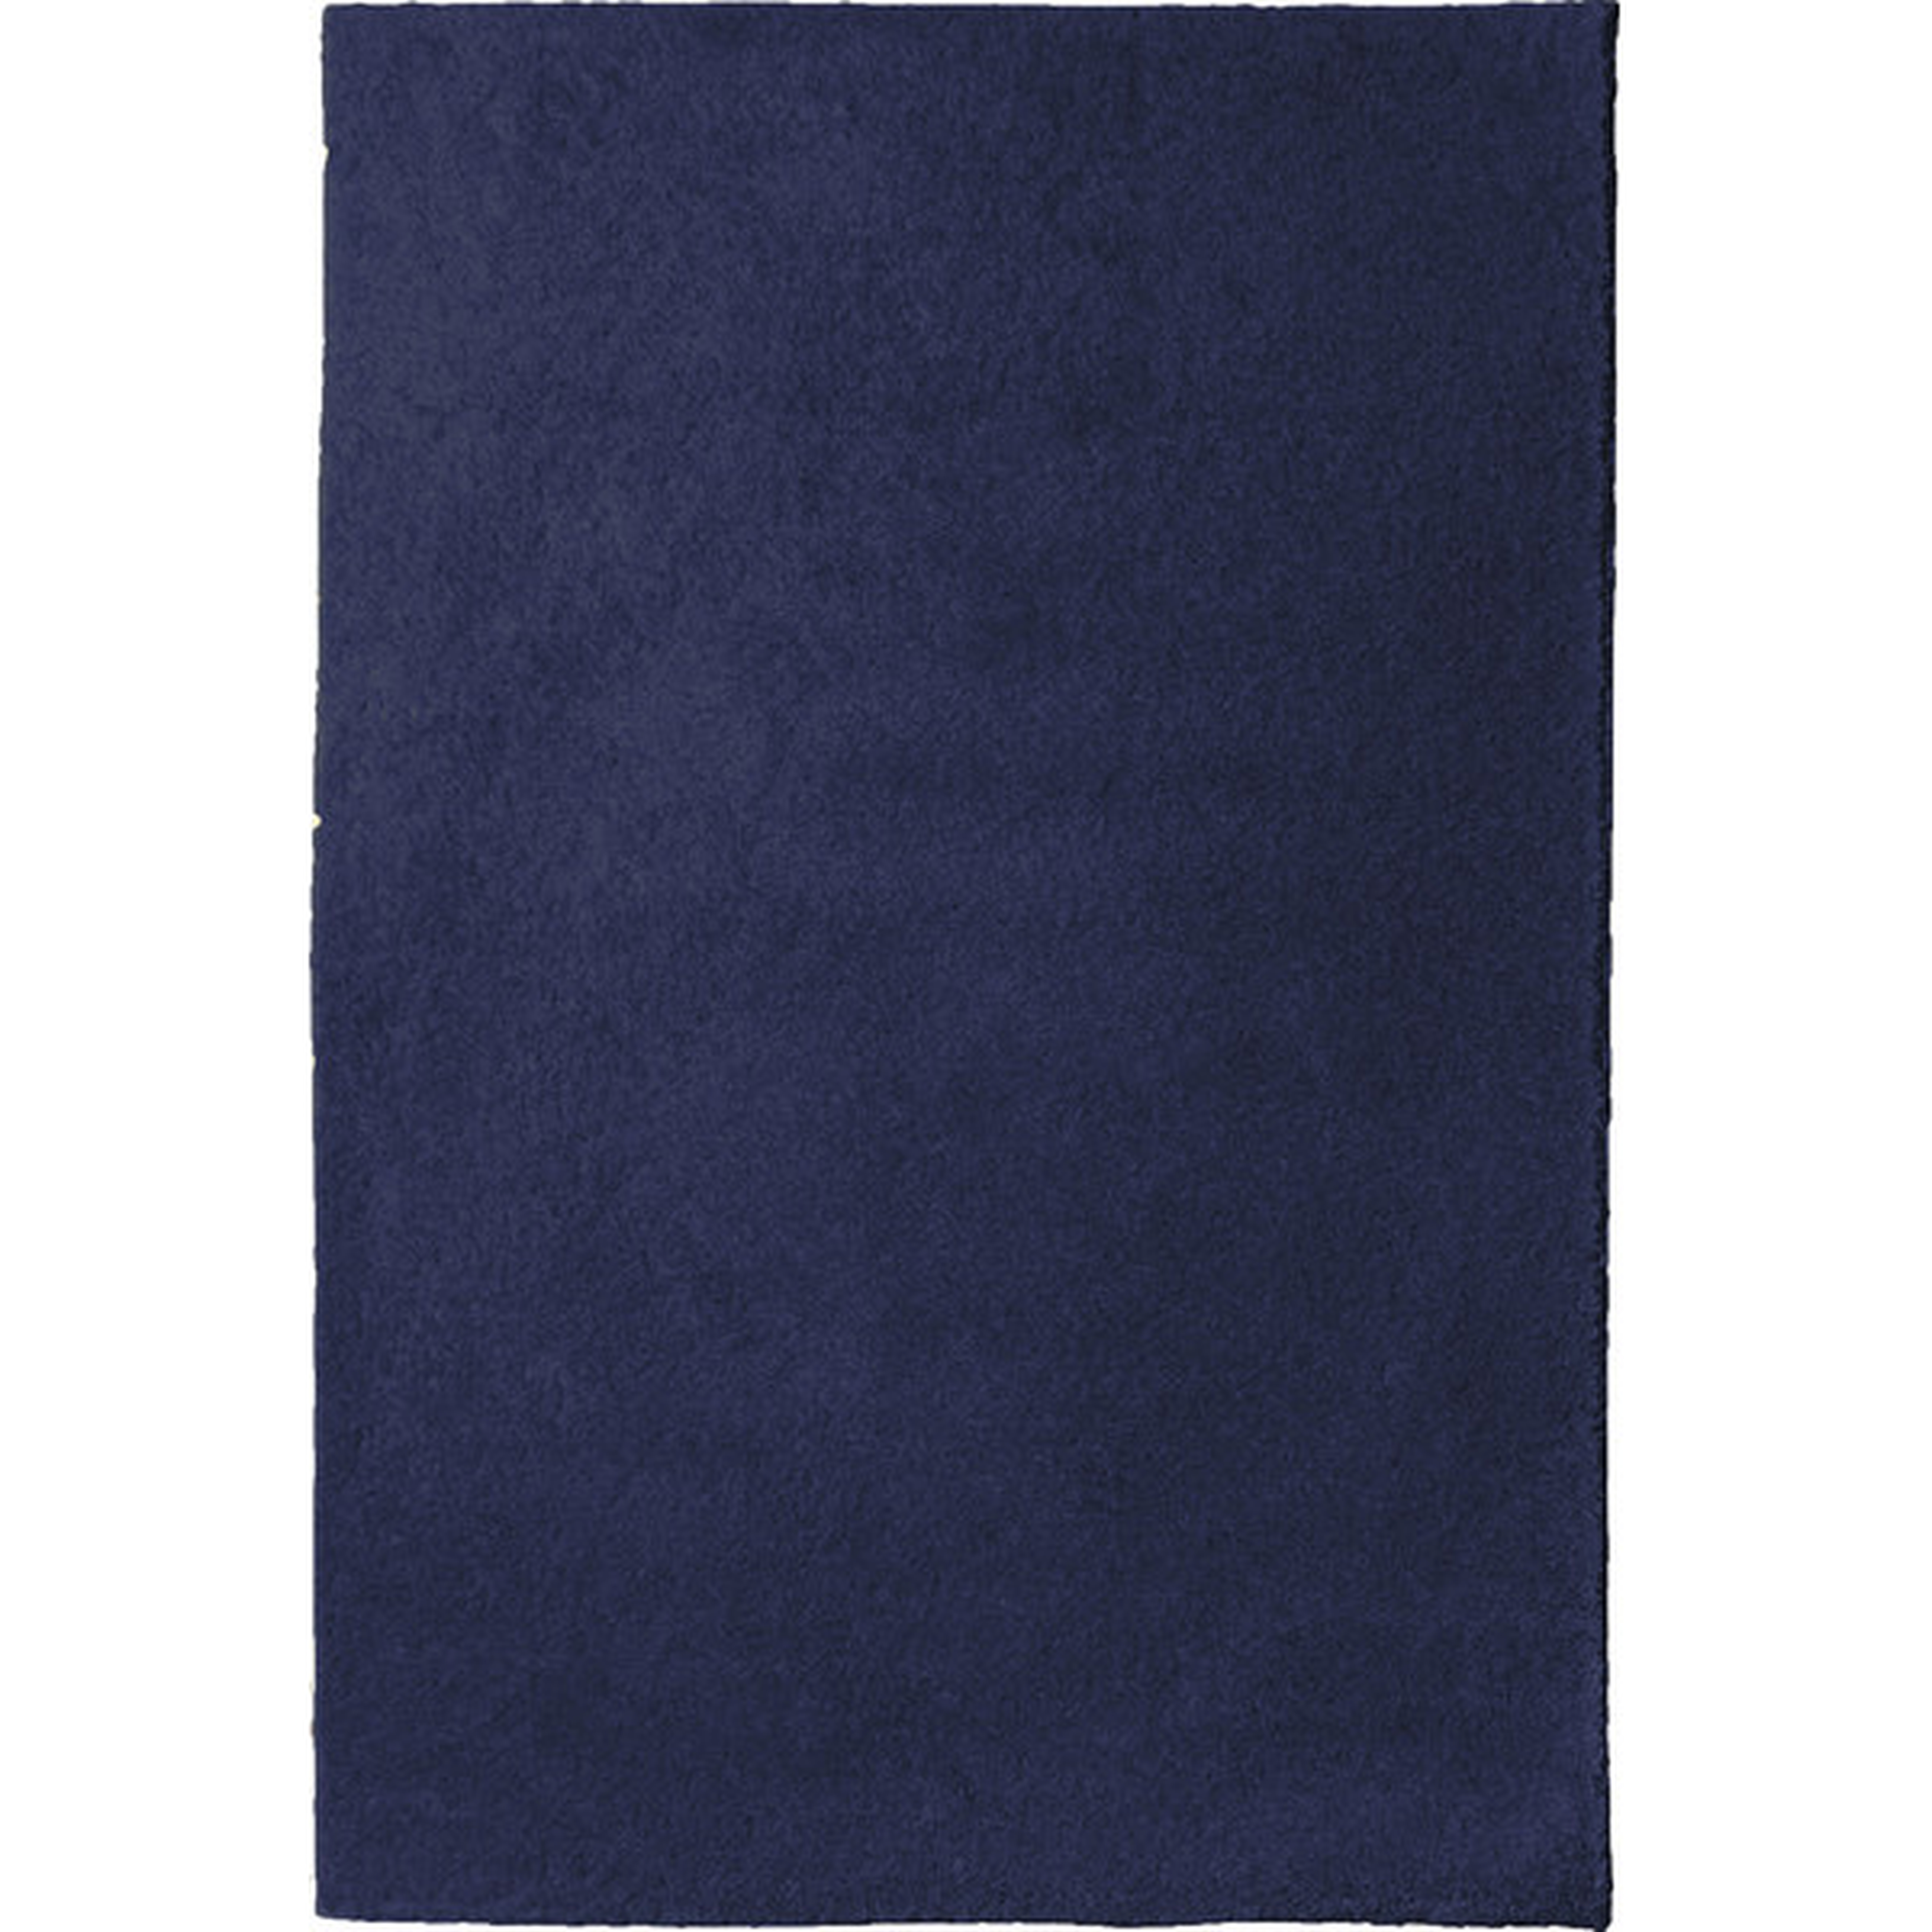 Ourspace Bright Midnight Navy Blue Area Rug - 9" x 12" - Wayfair